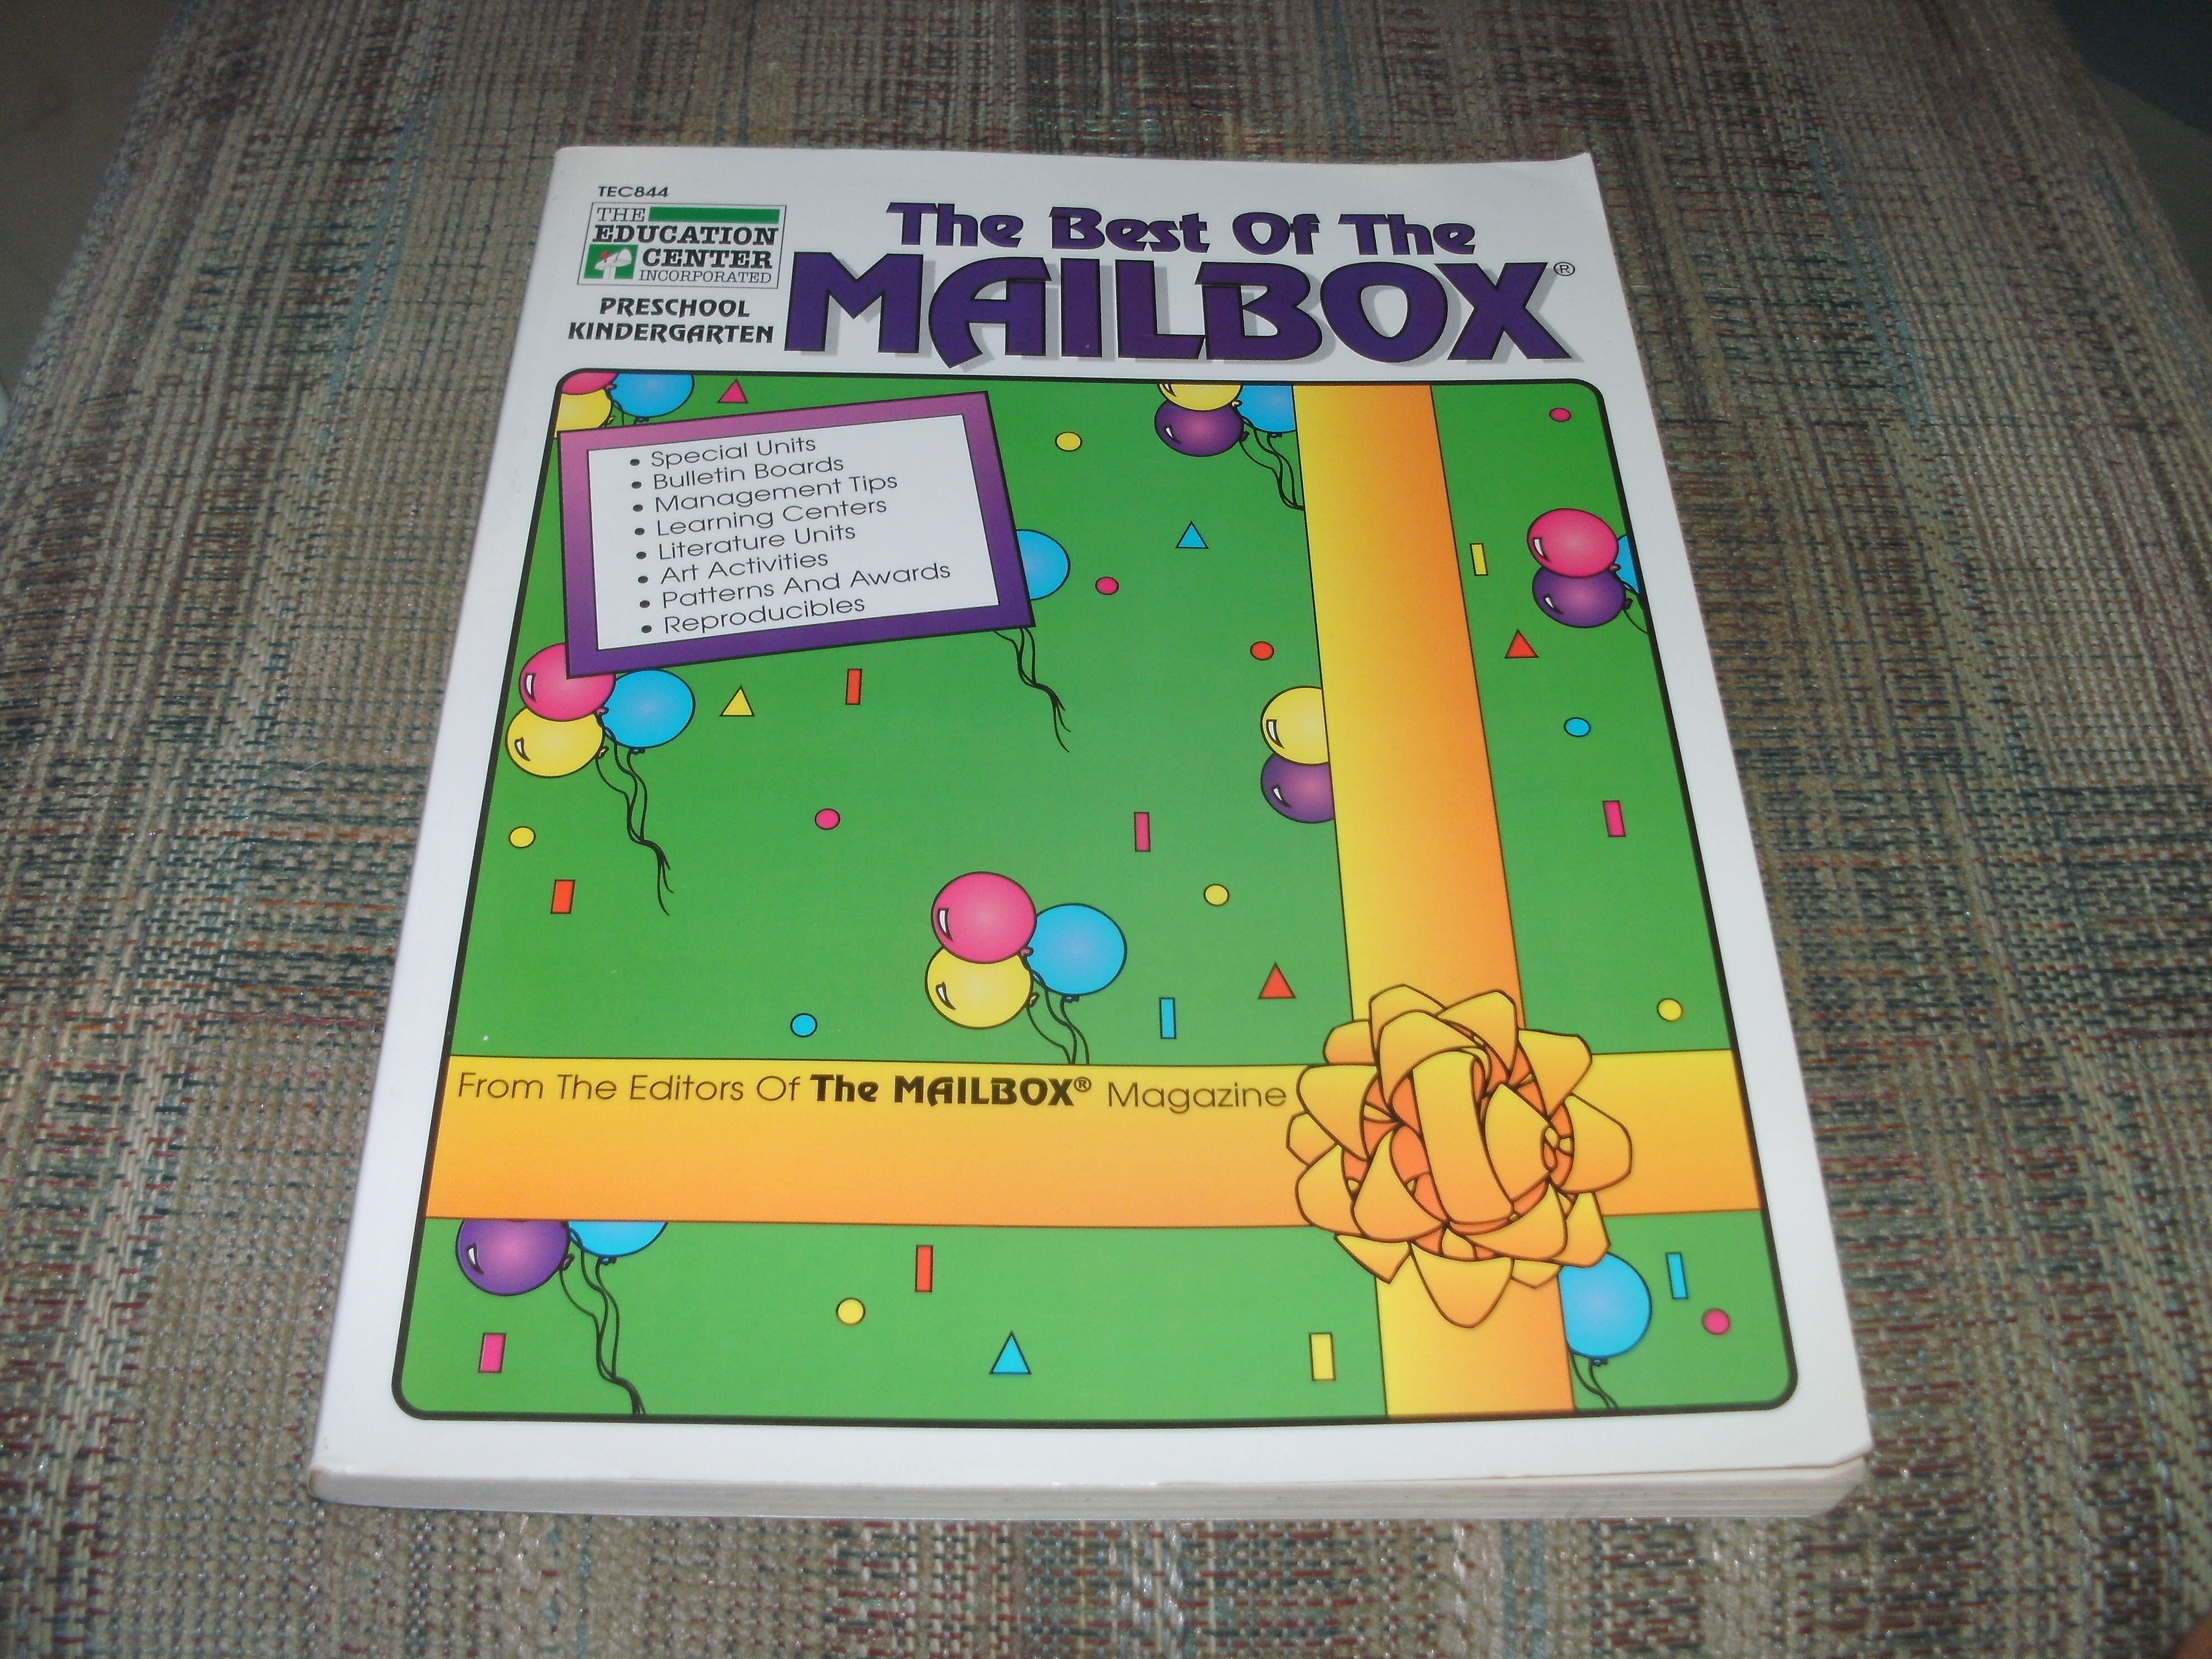 The Best of the Mailbox's featured image